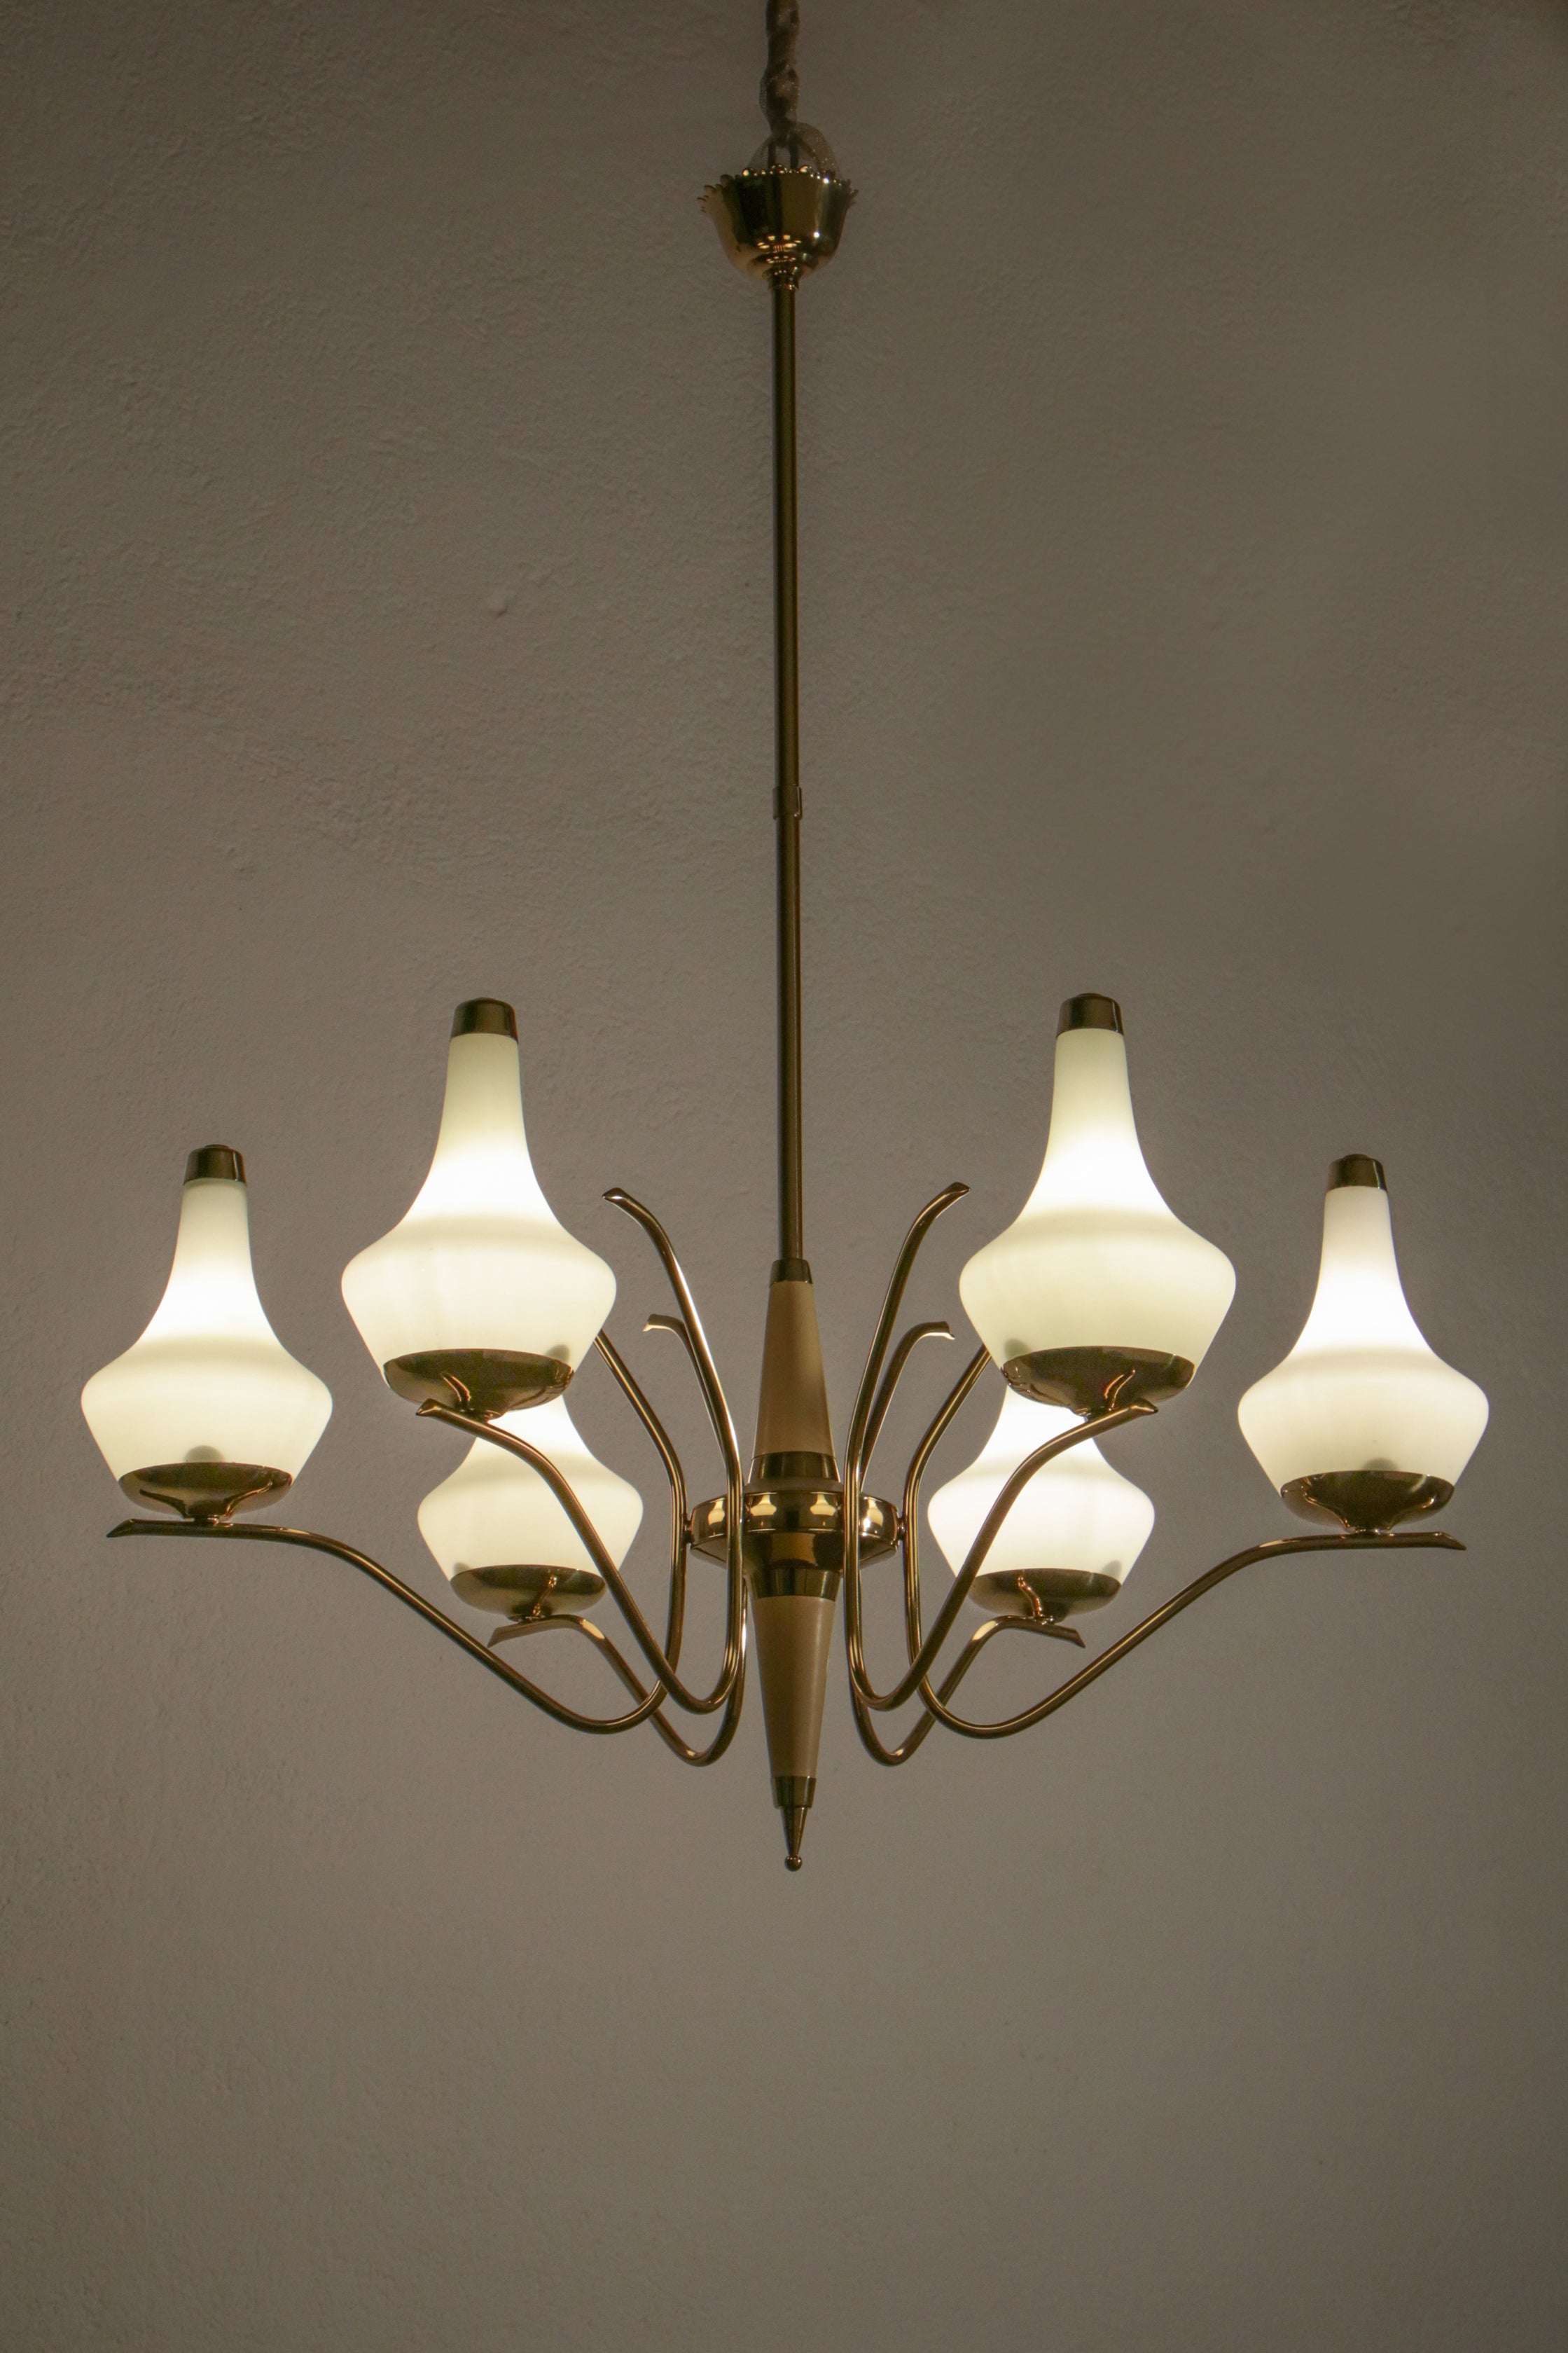 This beautiful Italian gold and ivory color chandelier from the 1950s is attributed to Stilnovo and features polished brass, ivory lacquered aluminum, opaline-coated glass, and six E14 light bulbs. 

The design of the chandelier is truly elegant,